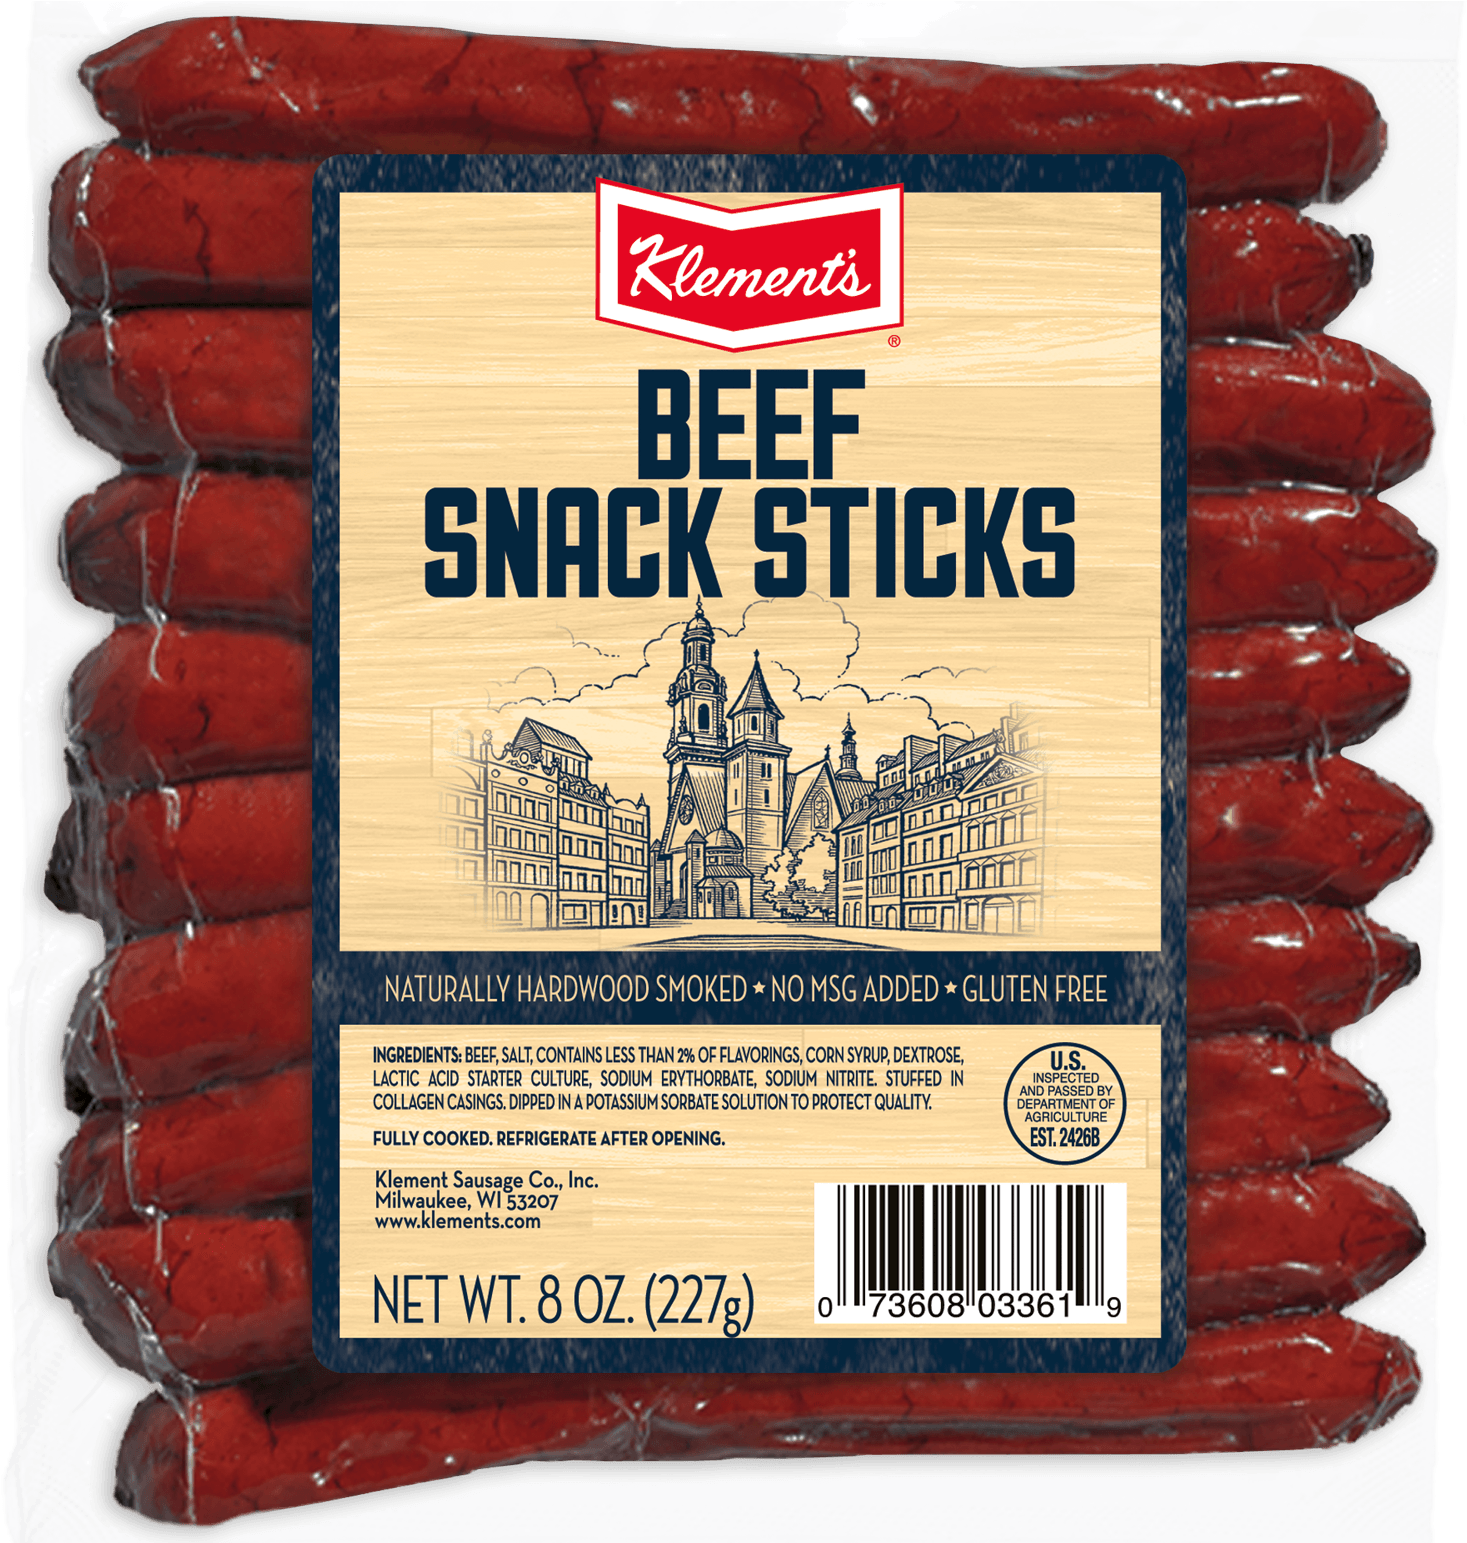 8oz Beef Snack Sticks - Klement's Snack Sticks, Teriyaki, 8 Ounce (1875x1542), Png Download